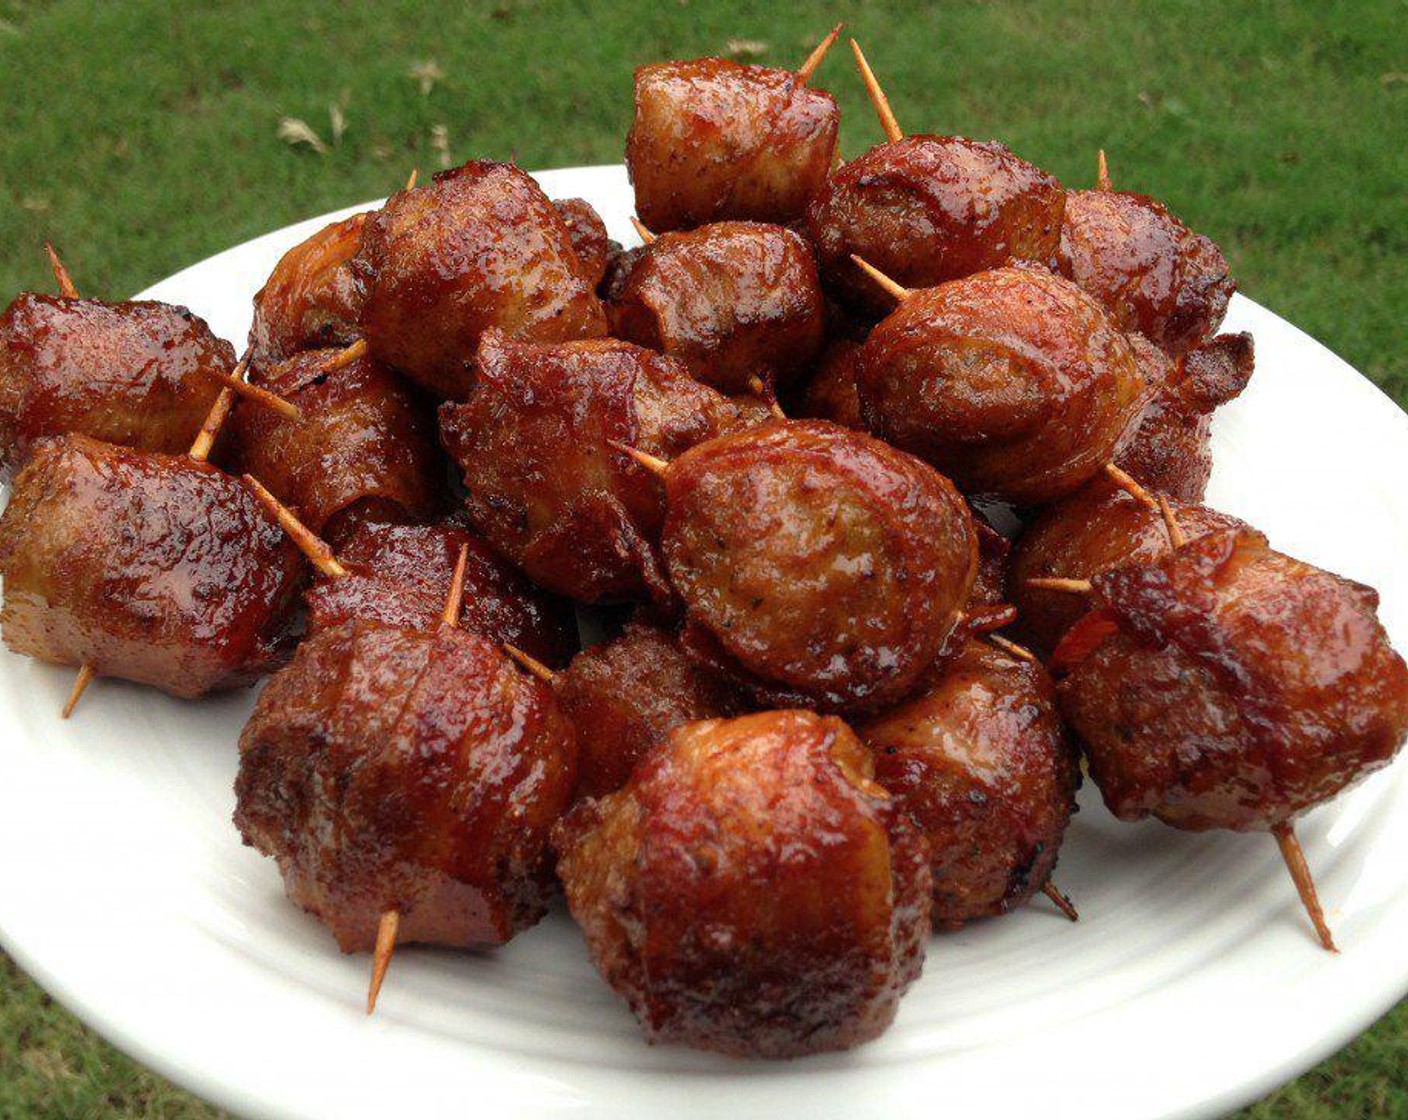 Bacon-Wrapped Meatballs